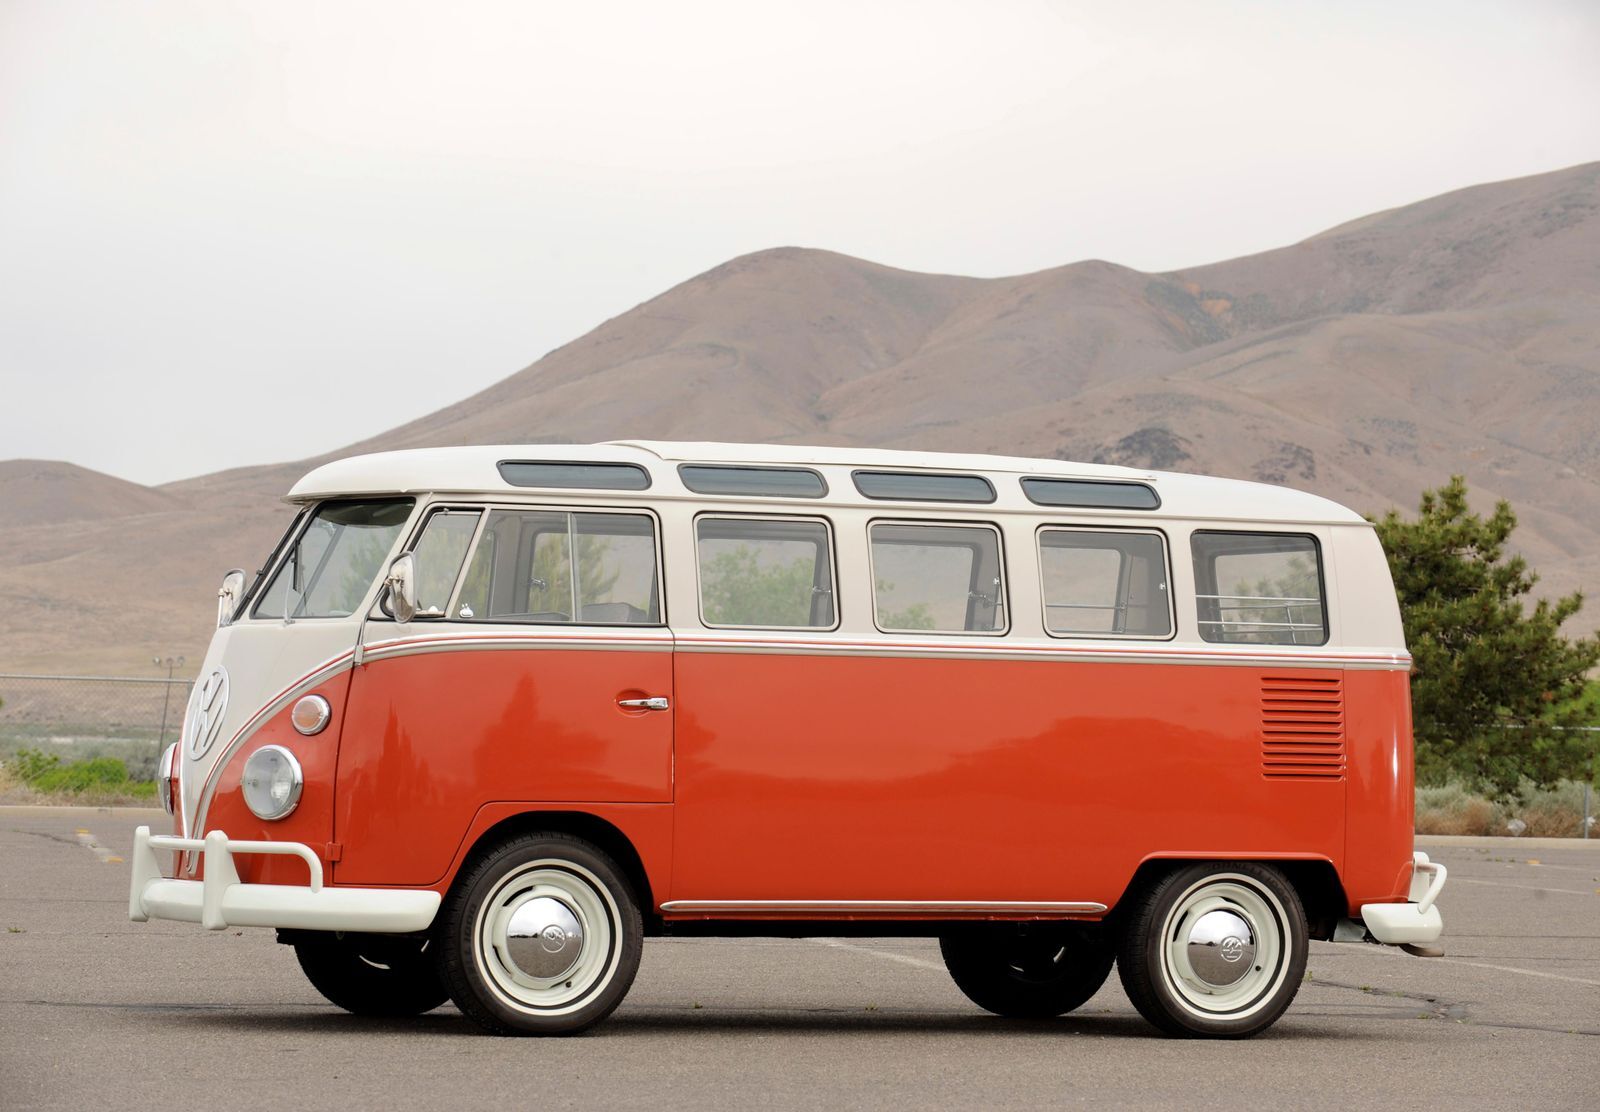 One version of the Apple Car resembled the VW microbus - The Apple Car could have changed the face of the auto industry